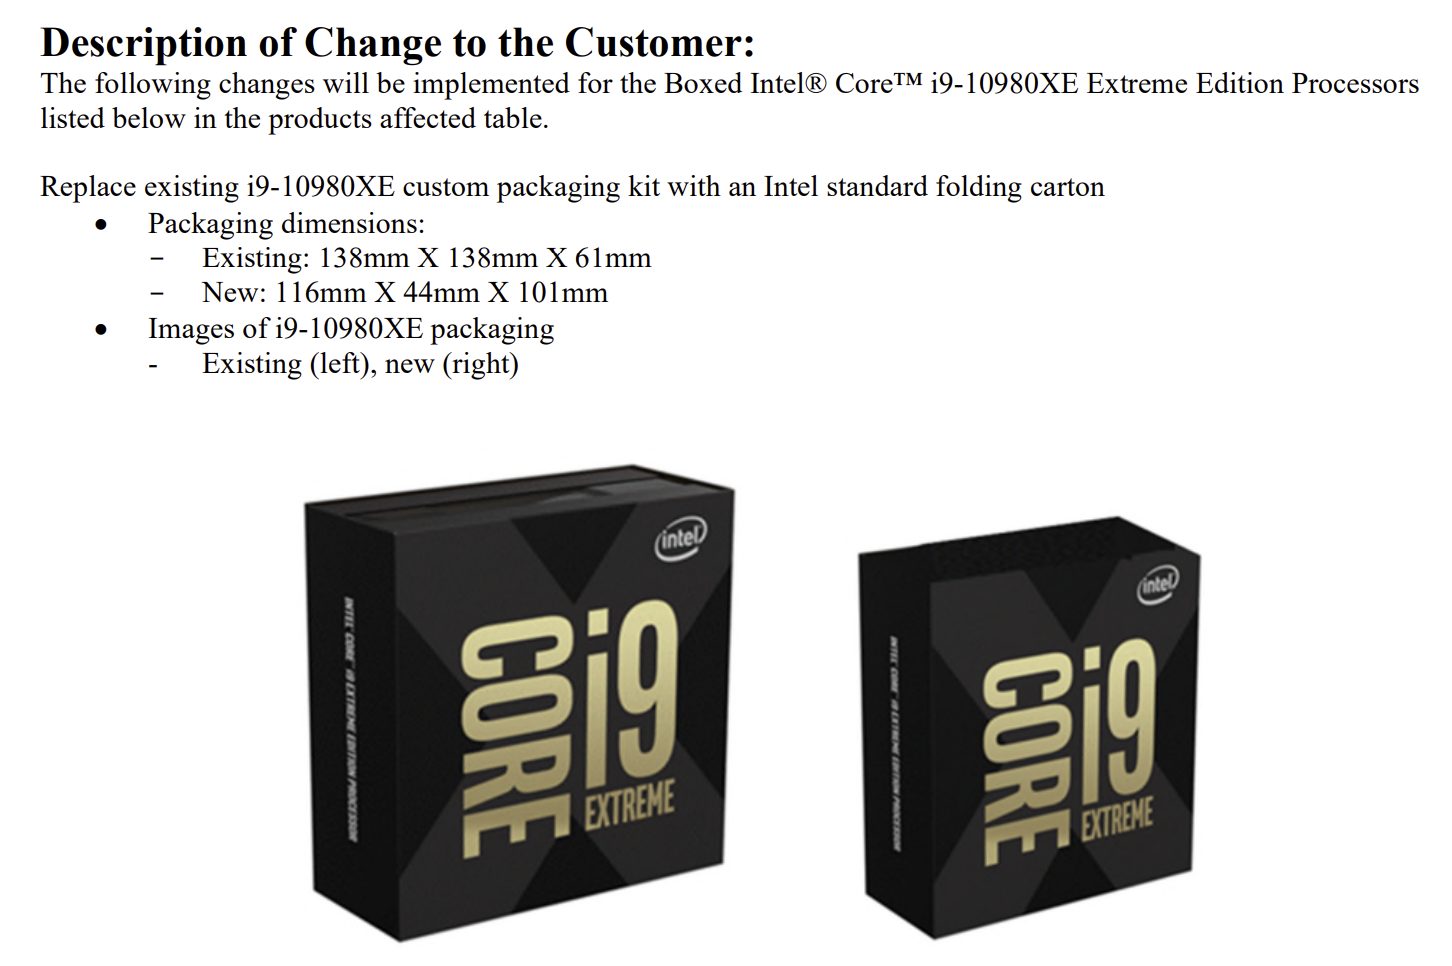 Intel discontinues premium packaging design for Core i9-12900K and i9-10980XE  CPUs 